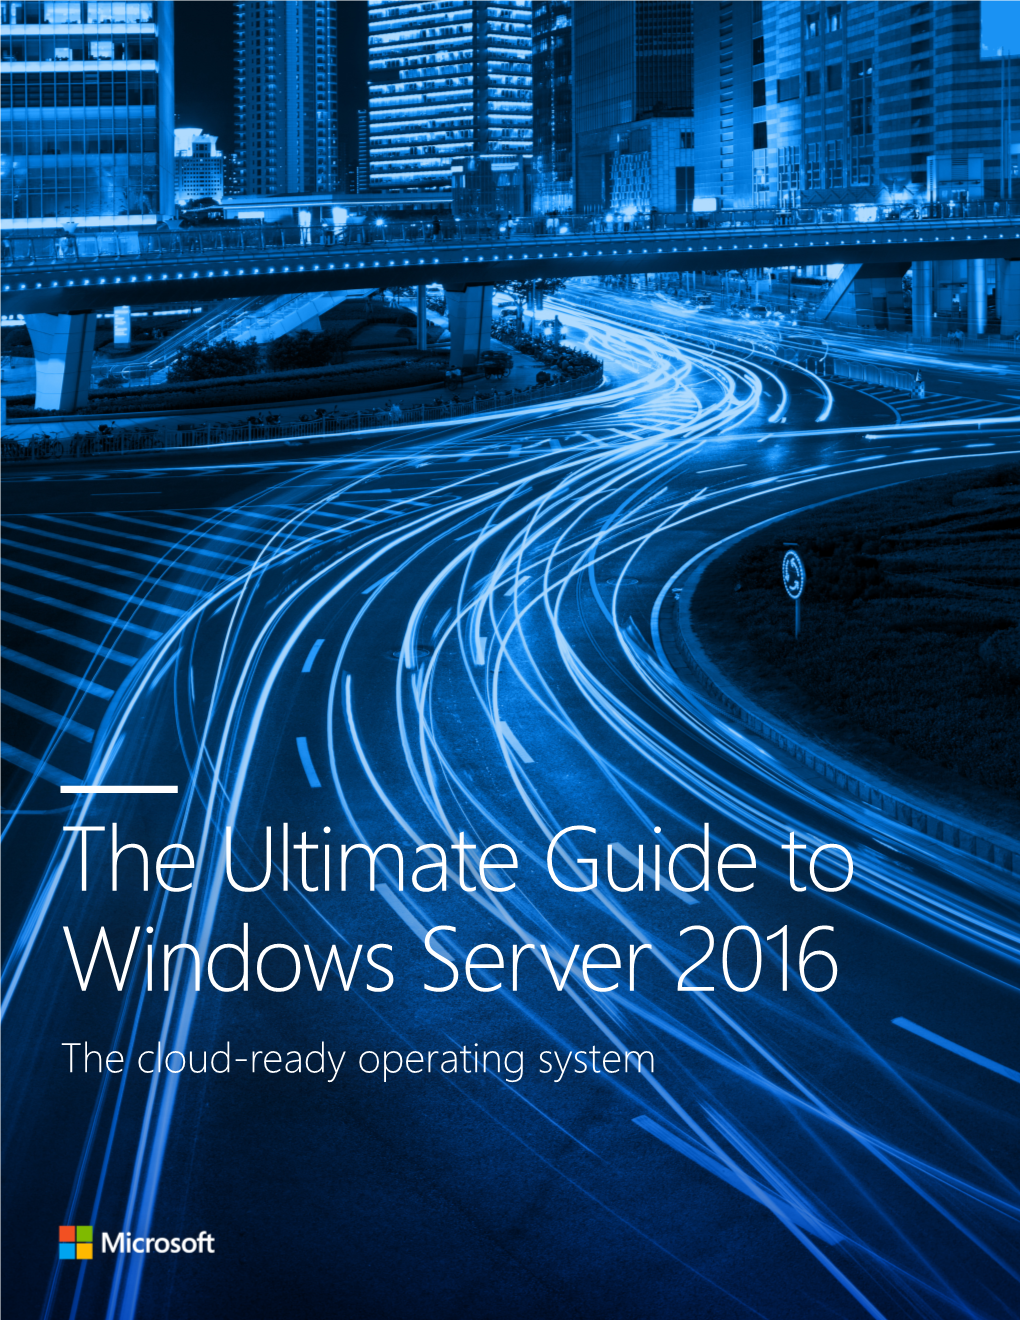 The Ultimate Guide to Windows Server 2016